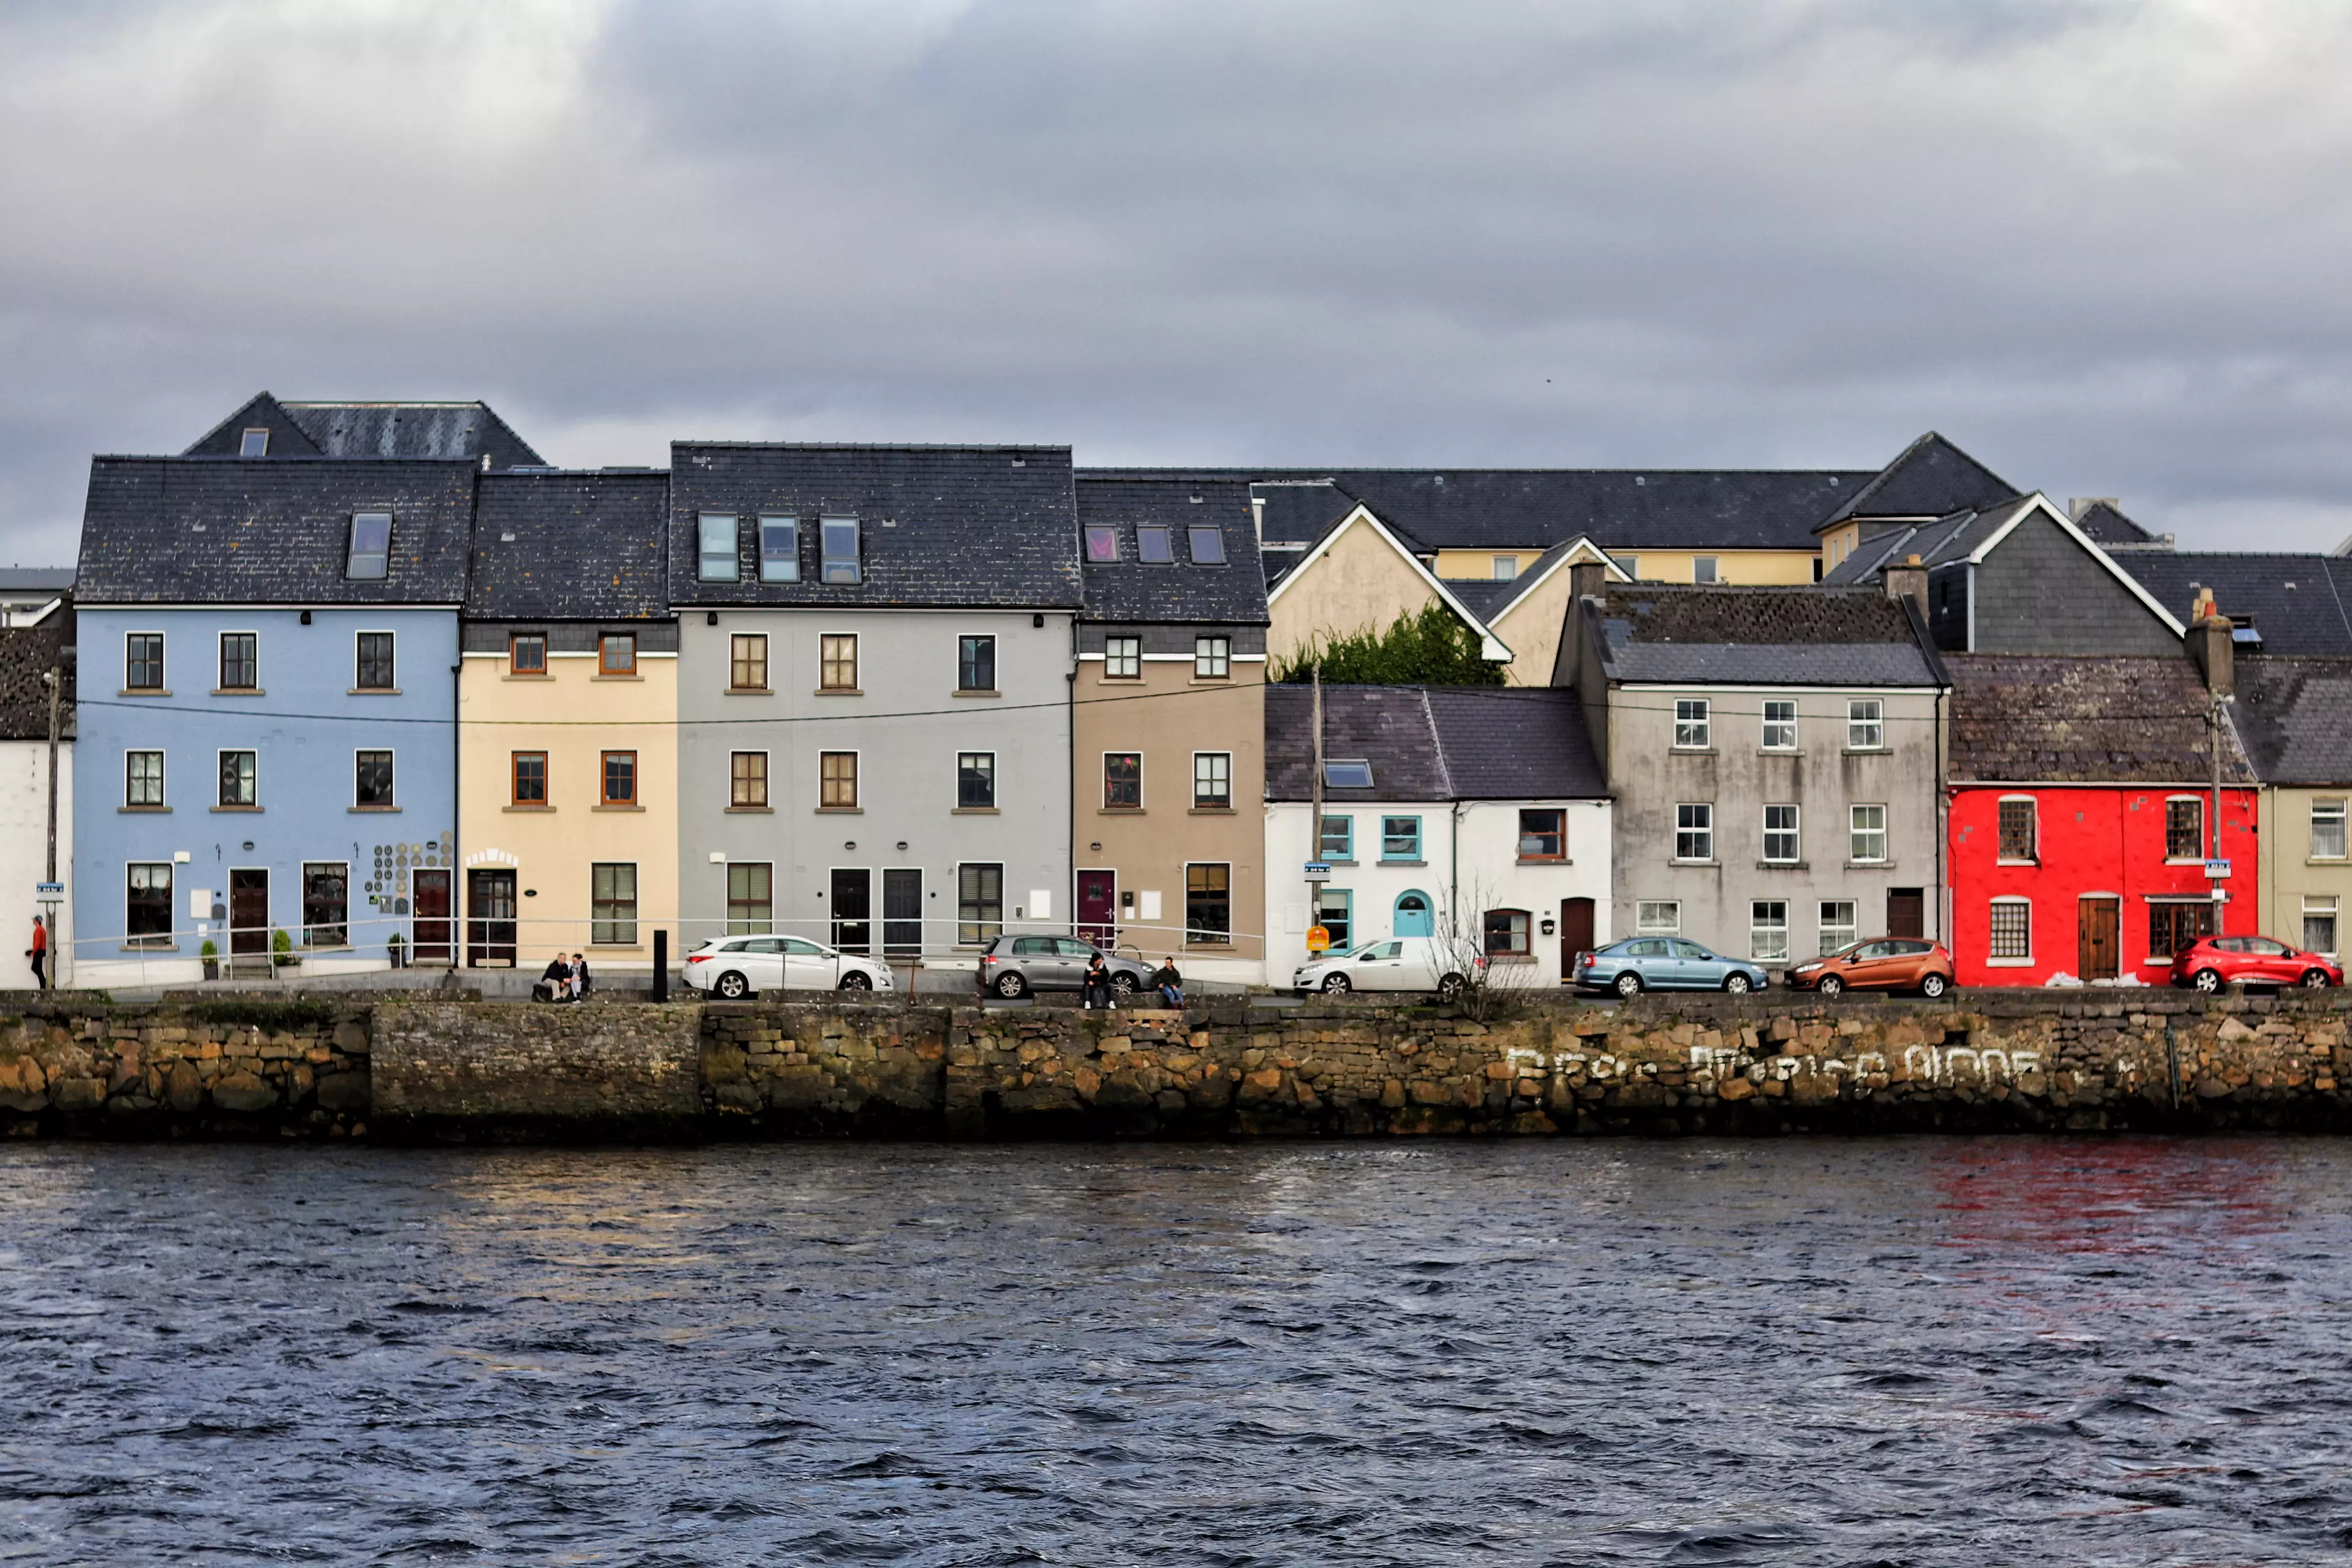 Galway (